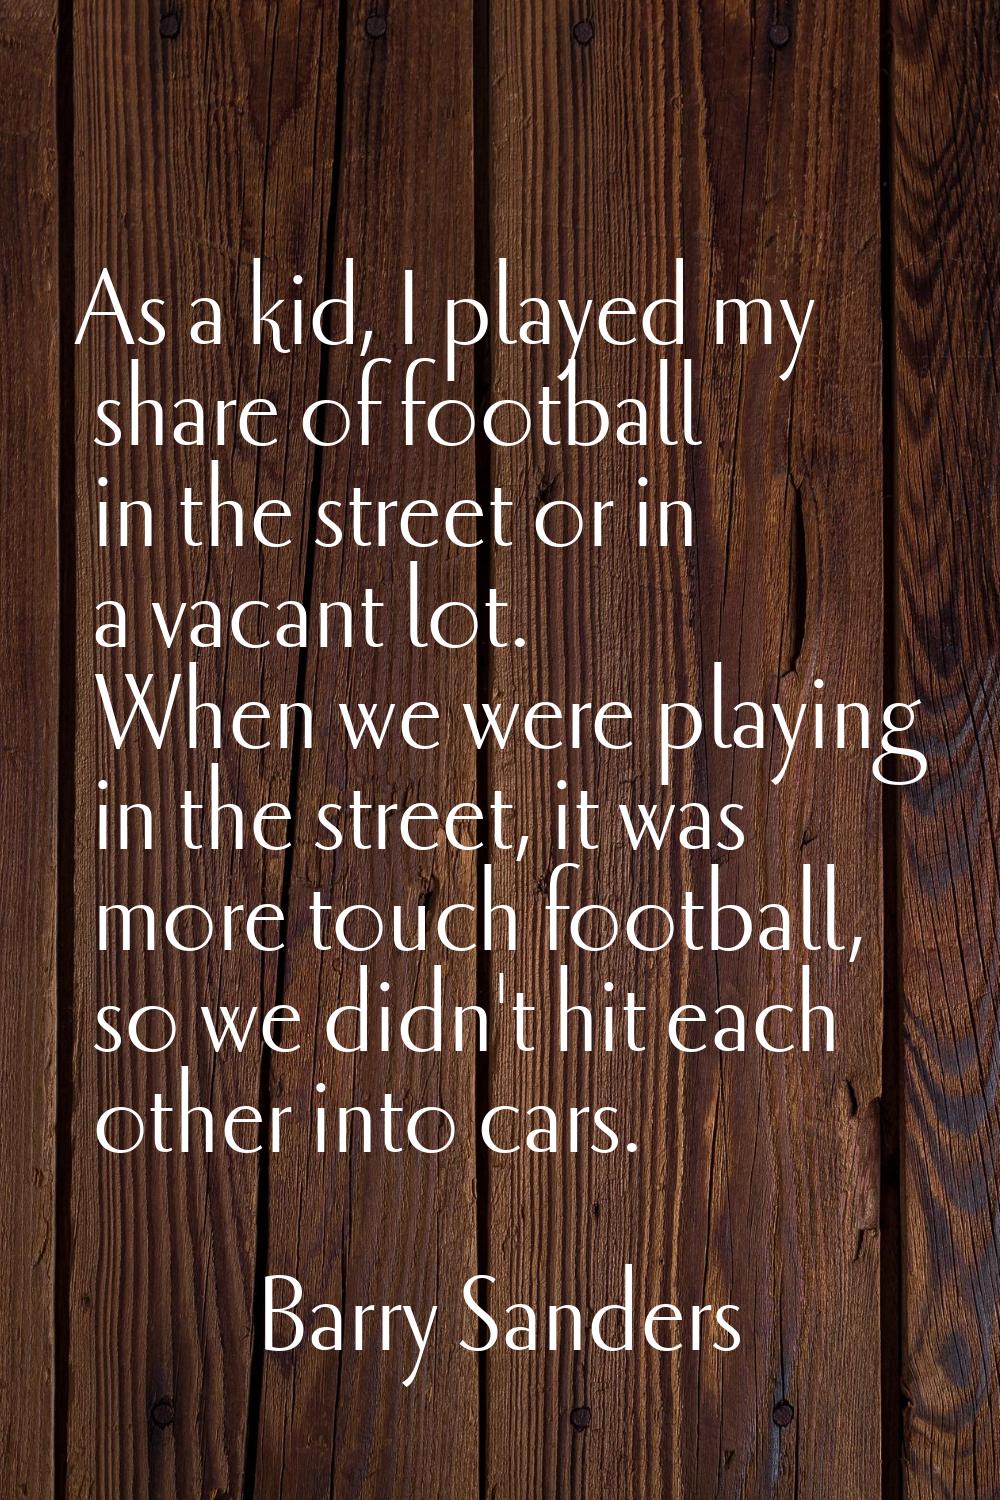 As a kid, I played my share of football in the street or in a vacant lot. When we were playing in t